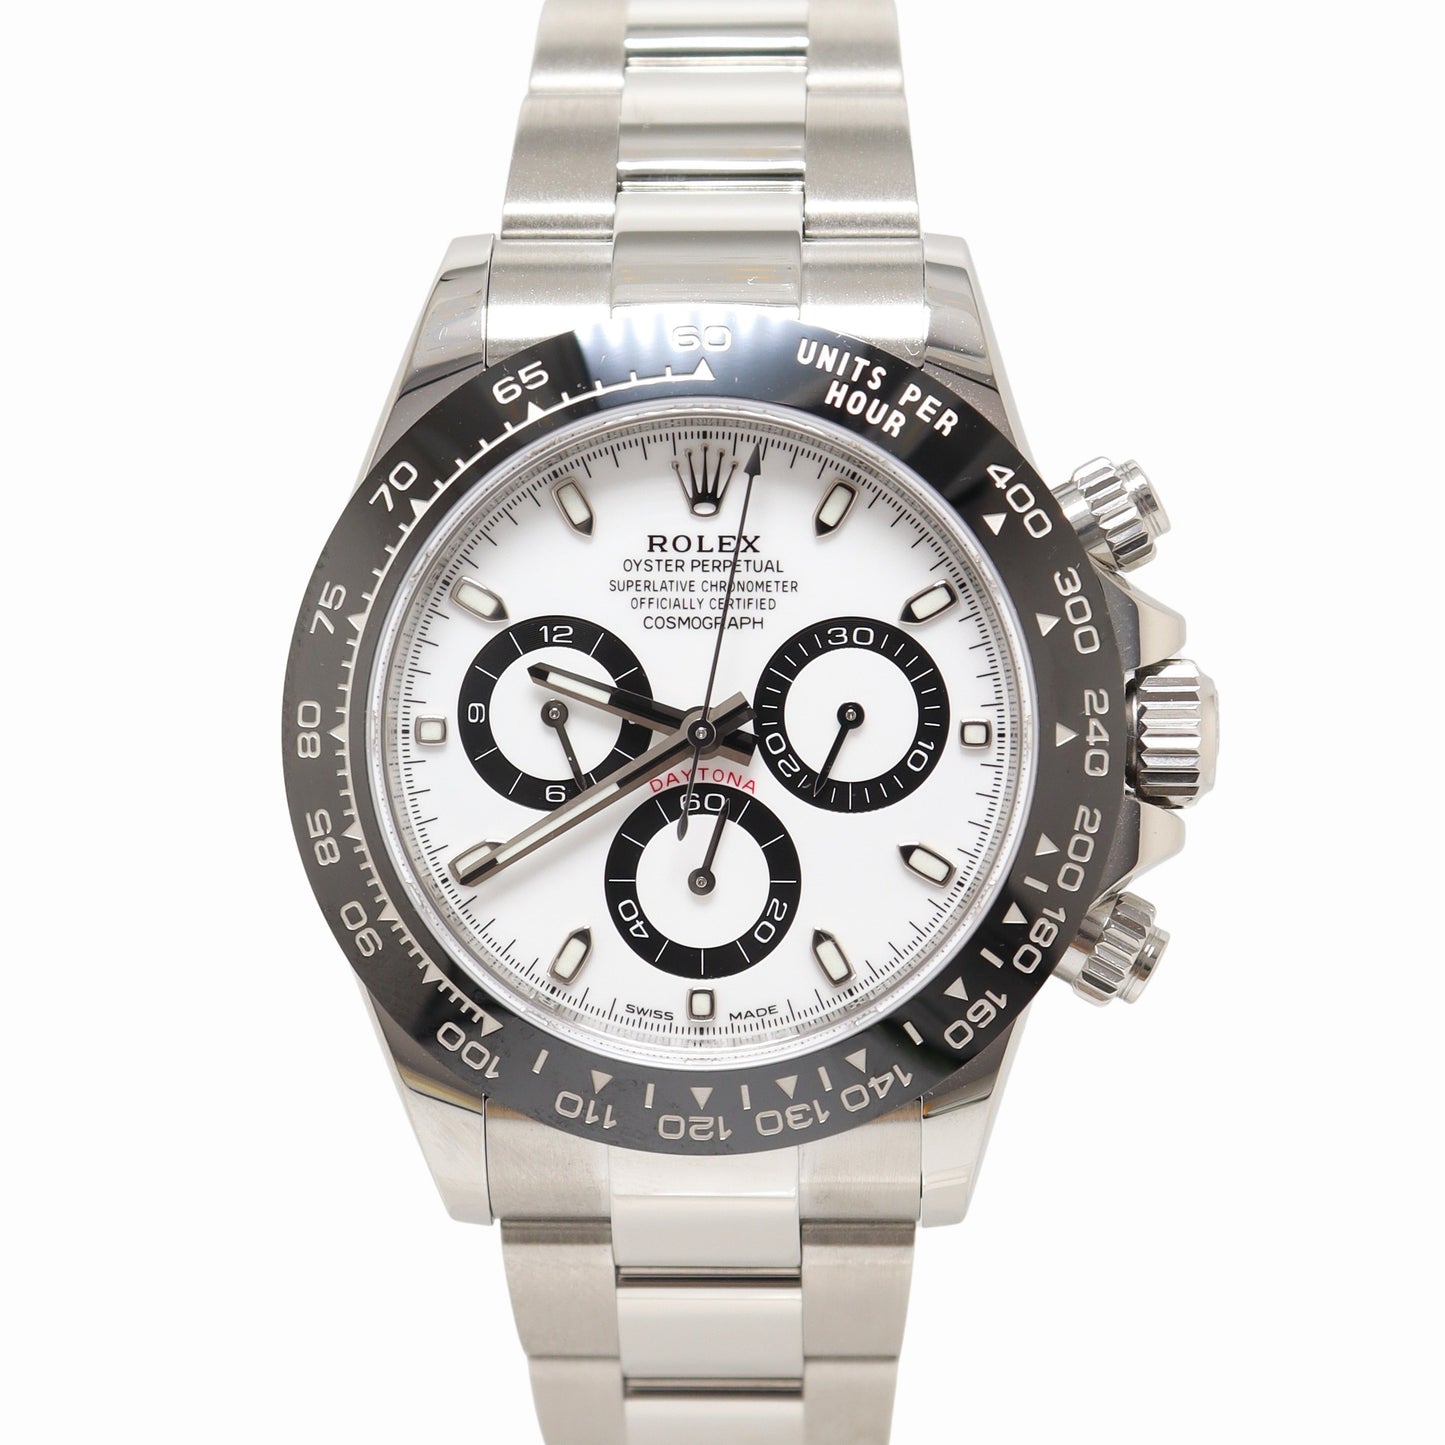 Rolex Daytona Stainless Steel 40mm White Chronograph Dial Watch Reference #: 116500LN